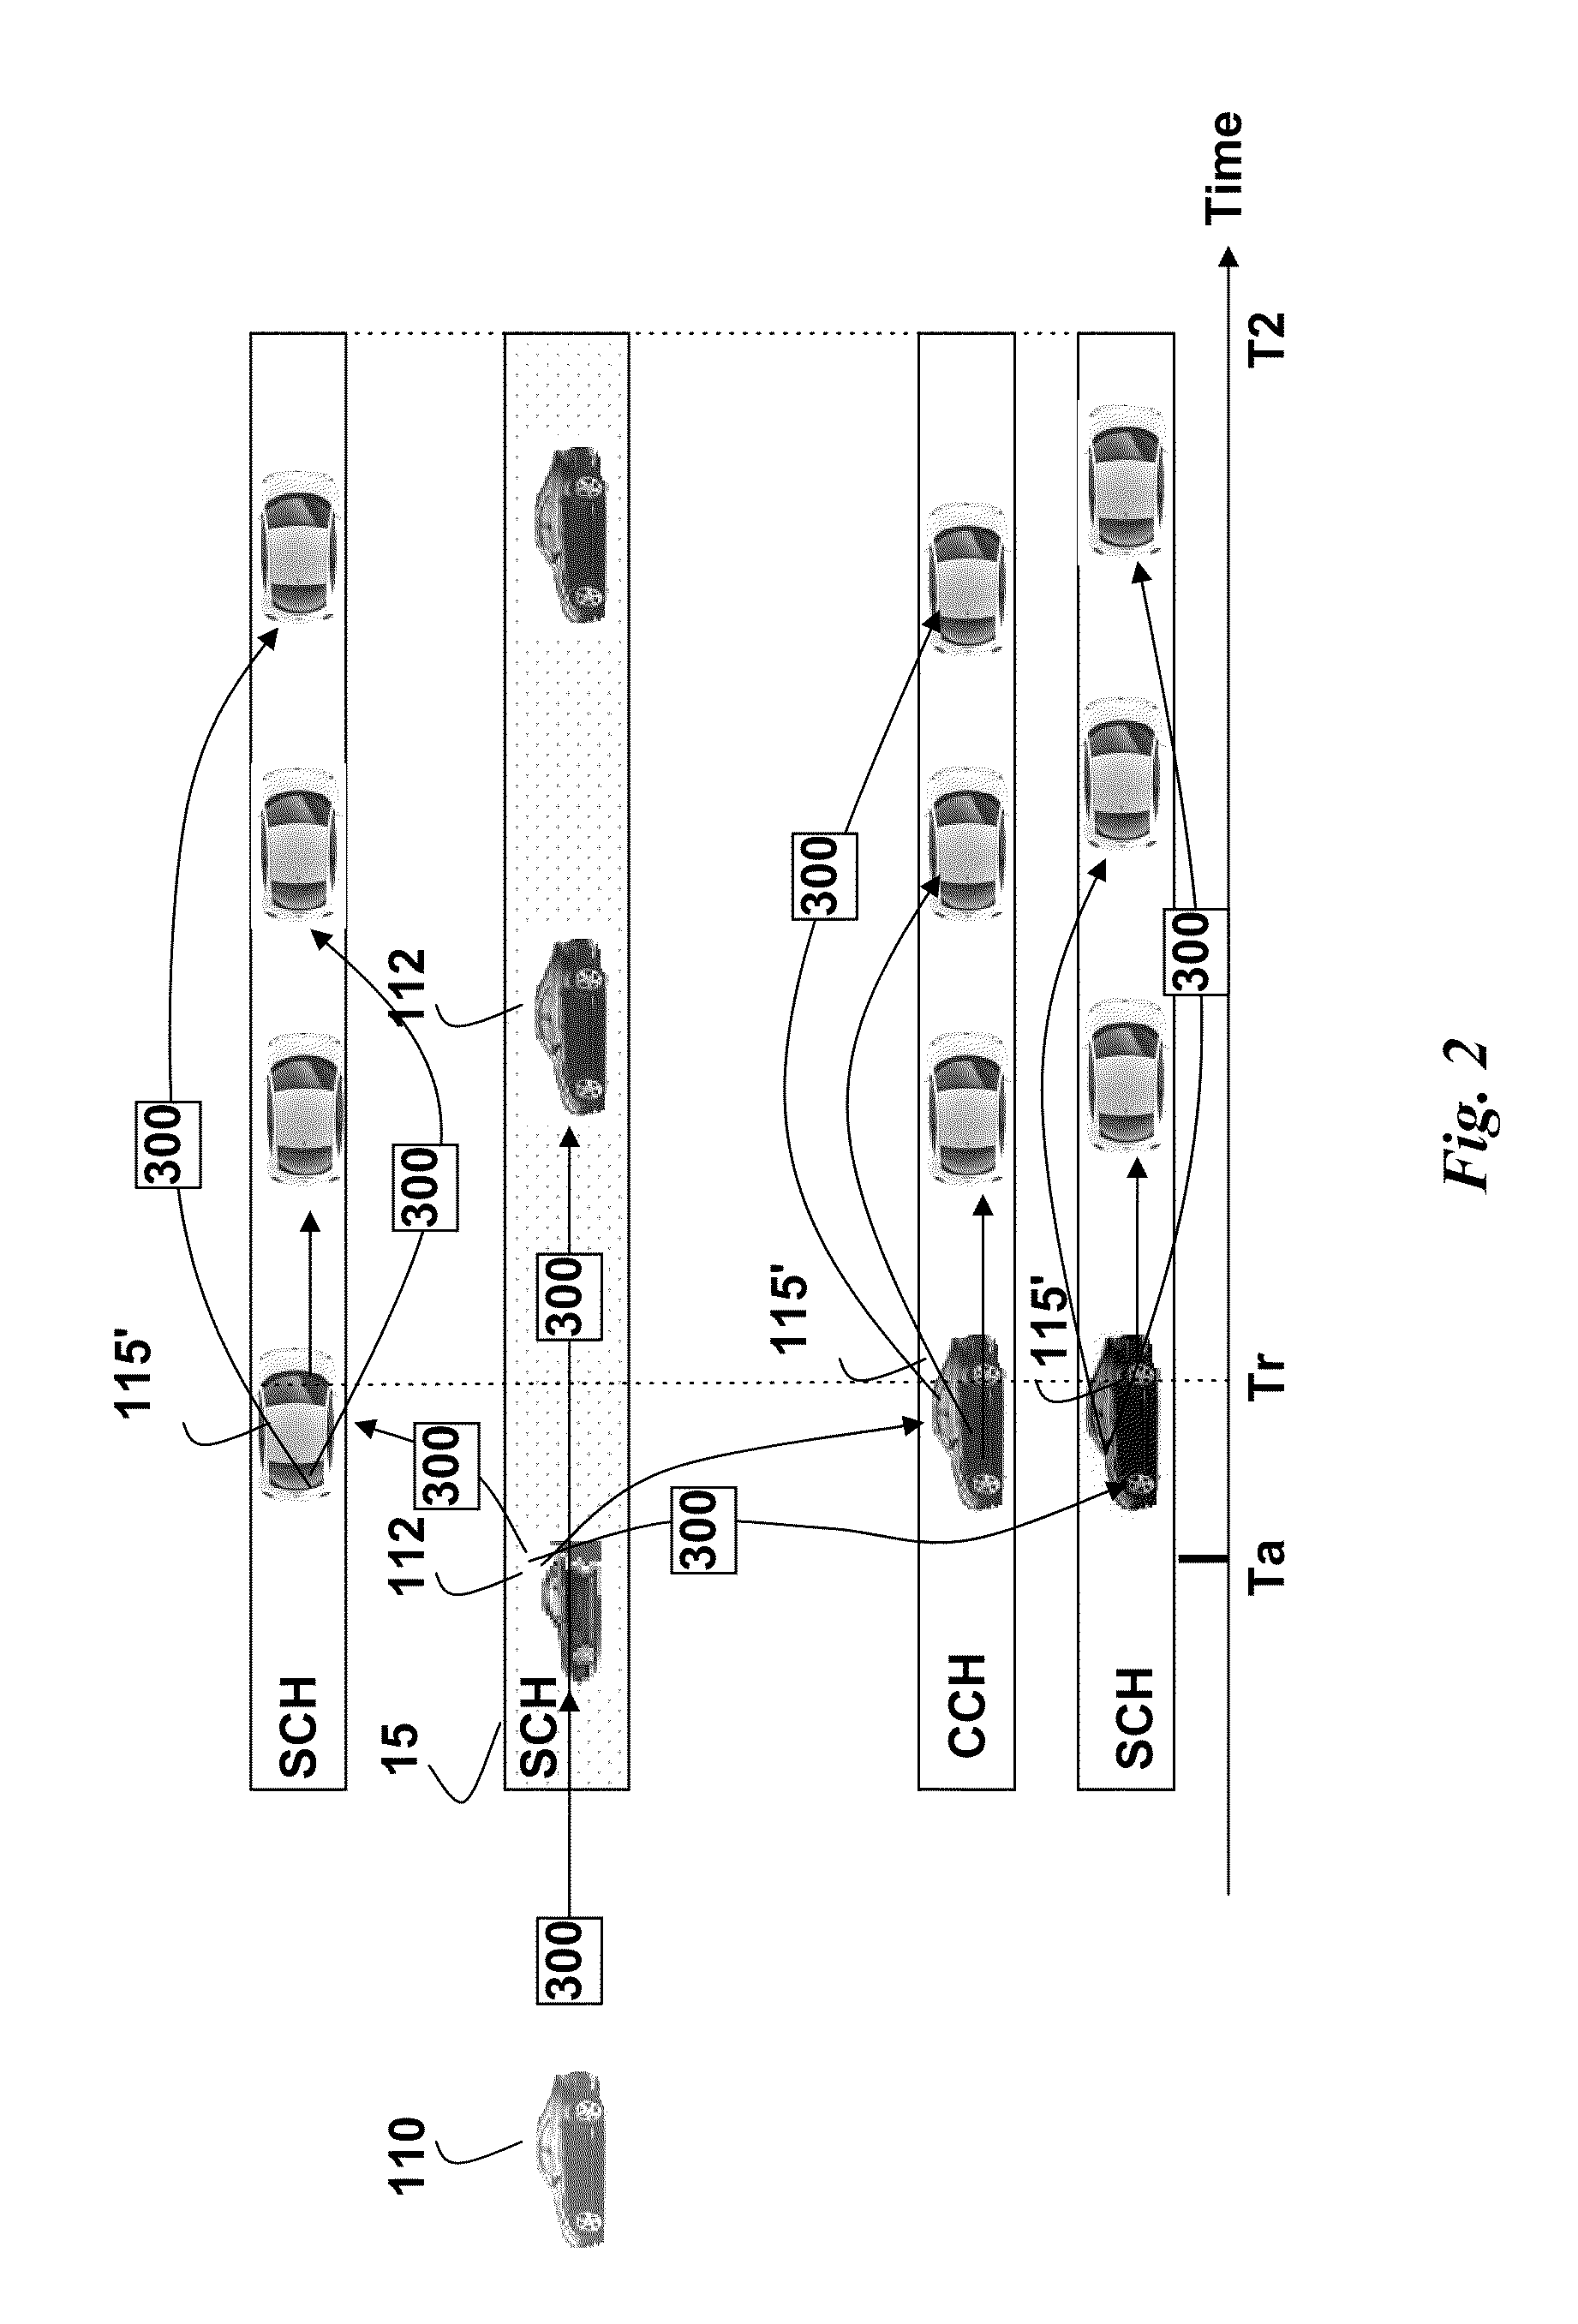 Broadcasting Messages in Multi-Channel Vehicular Networks